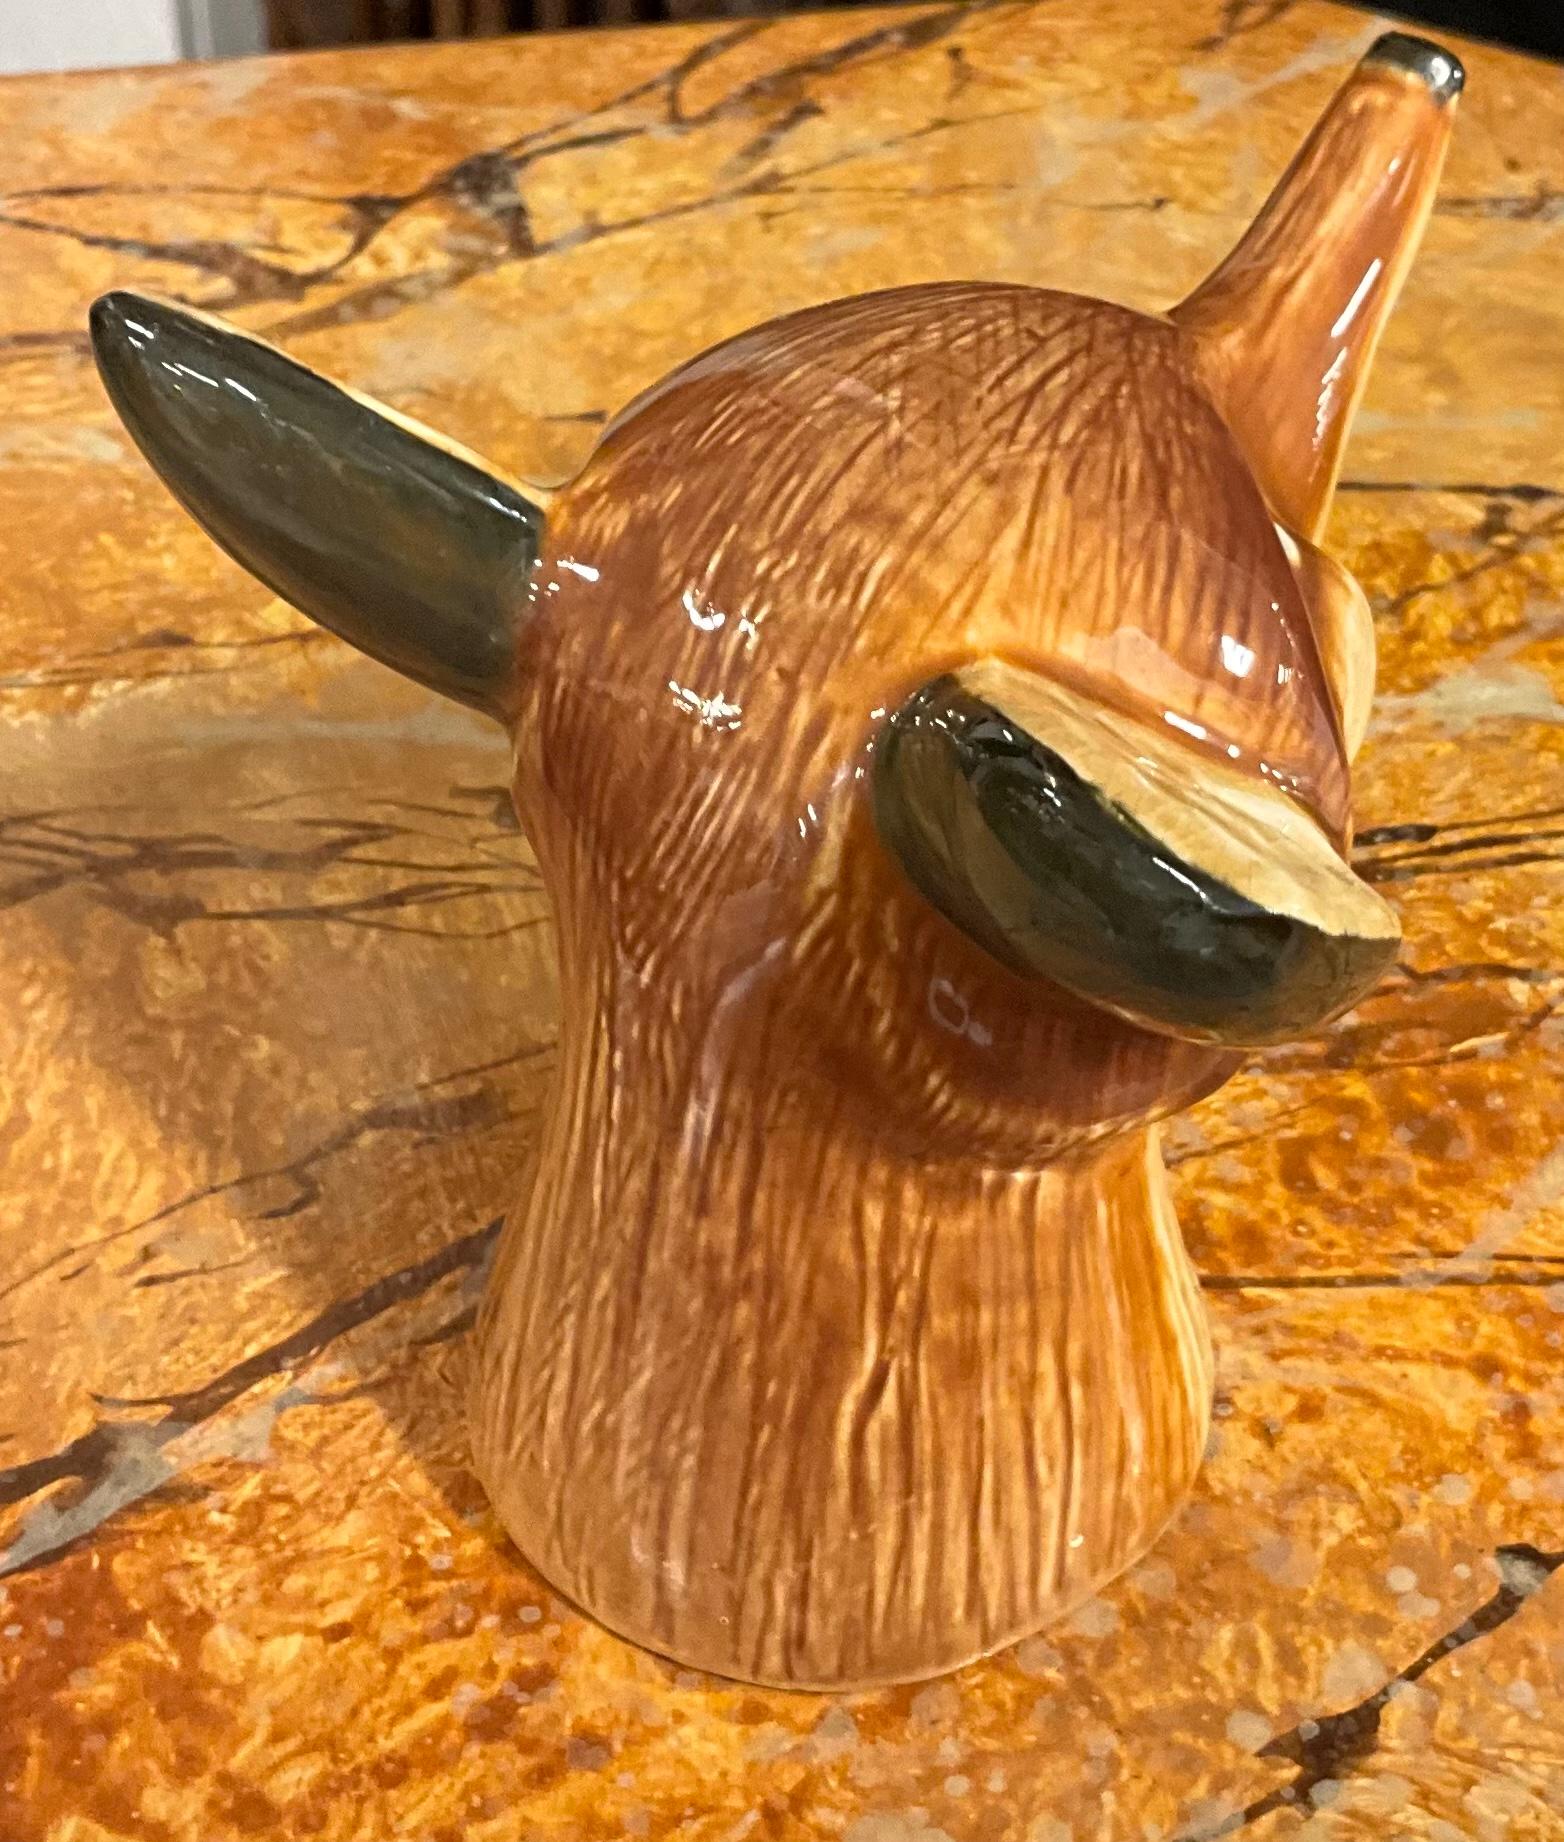 A little rare stirrup cup! I have had many, but not like this little guy.! It is a late 19th century English staffordshire pottery stirrup cup. It is in the form of a fox head. There are no condition issues to note.